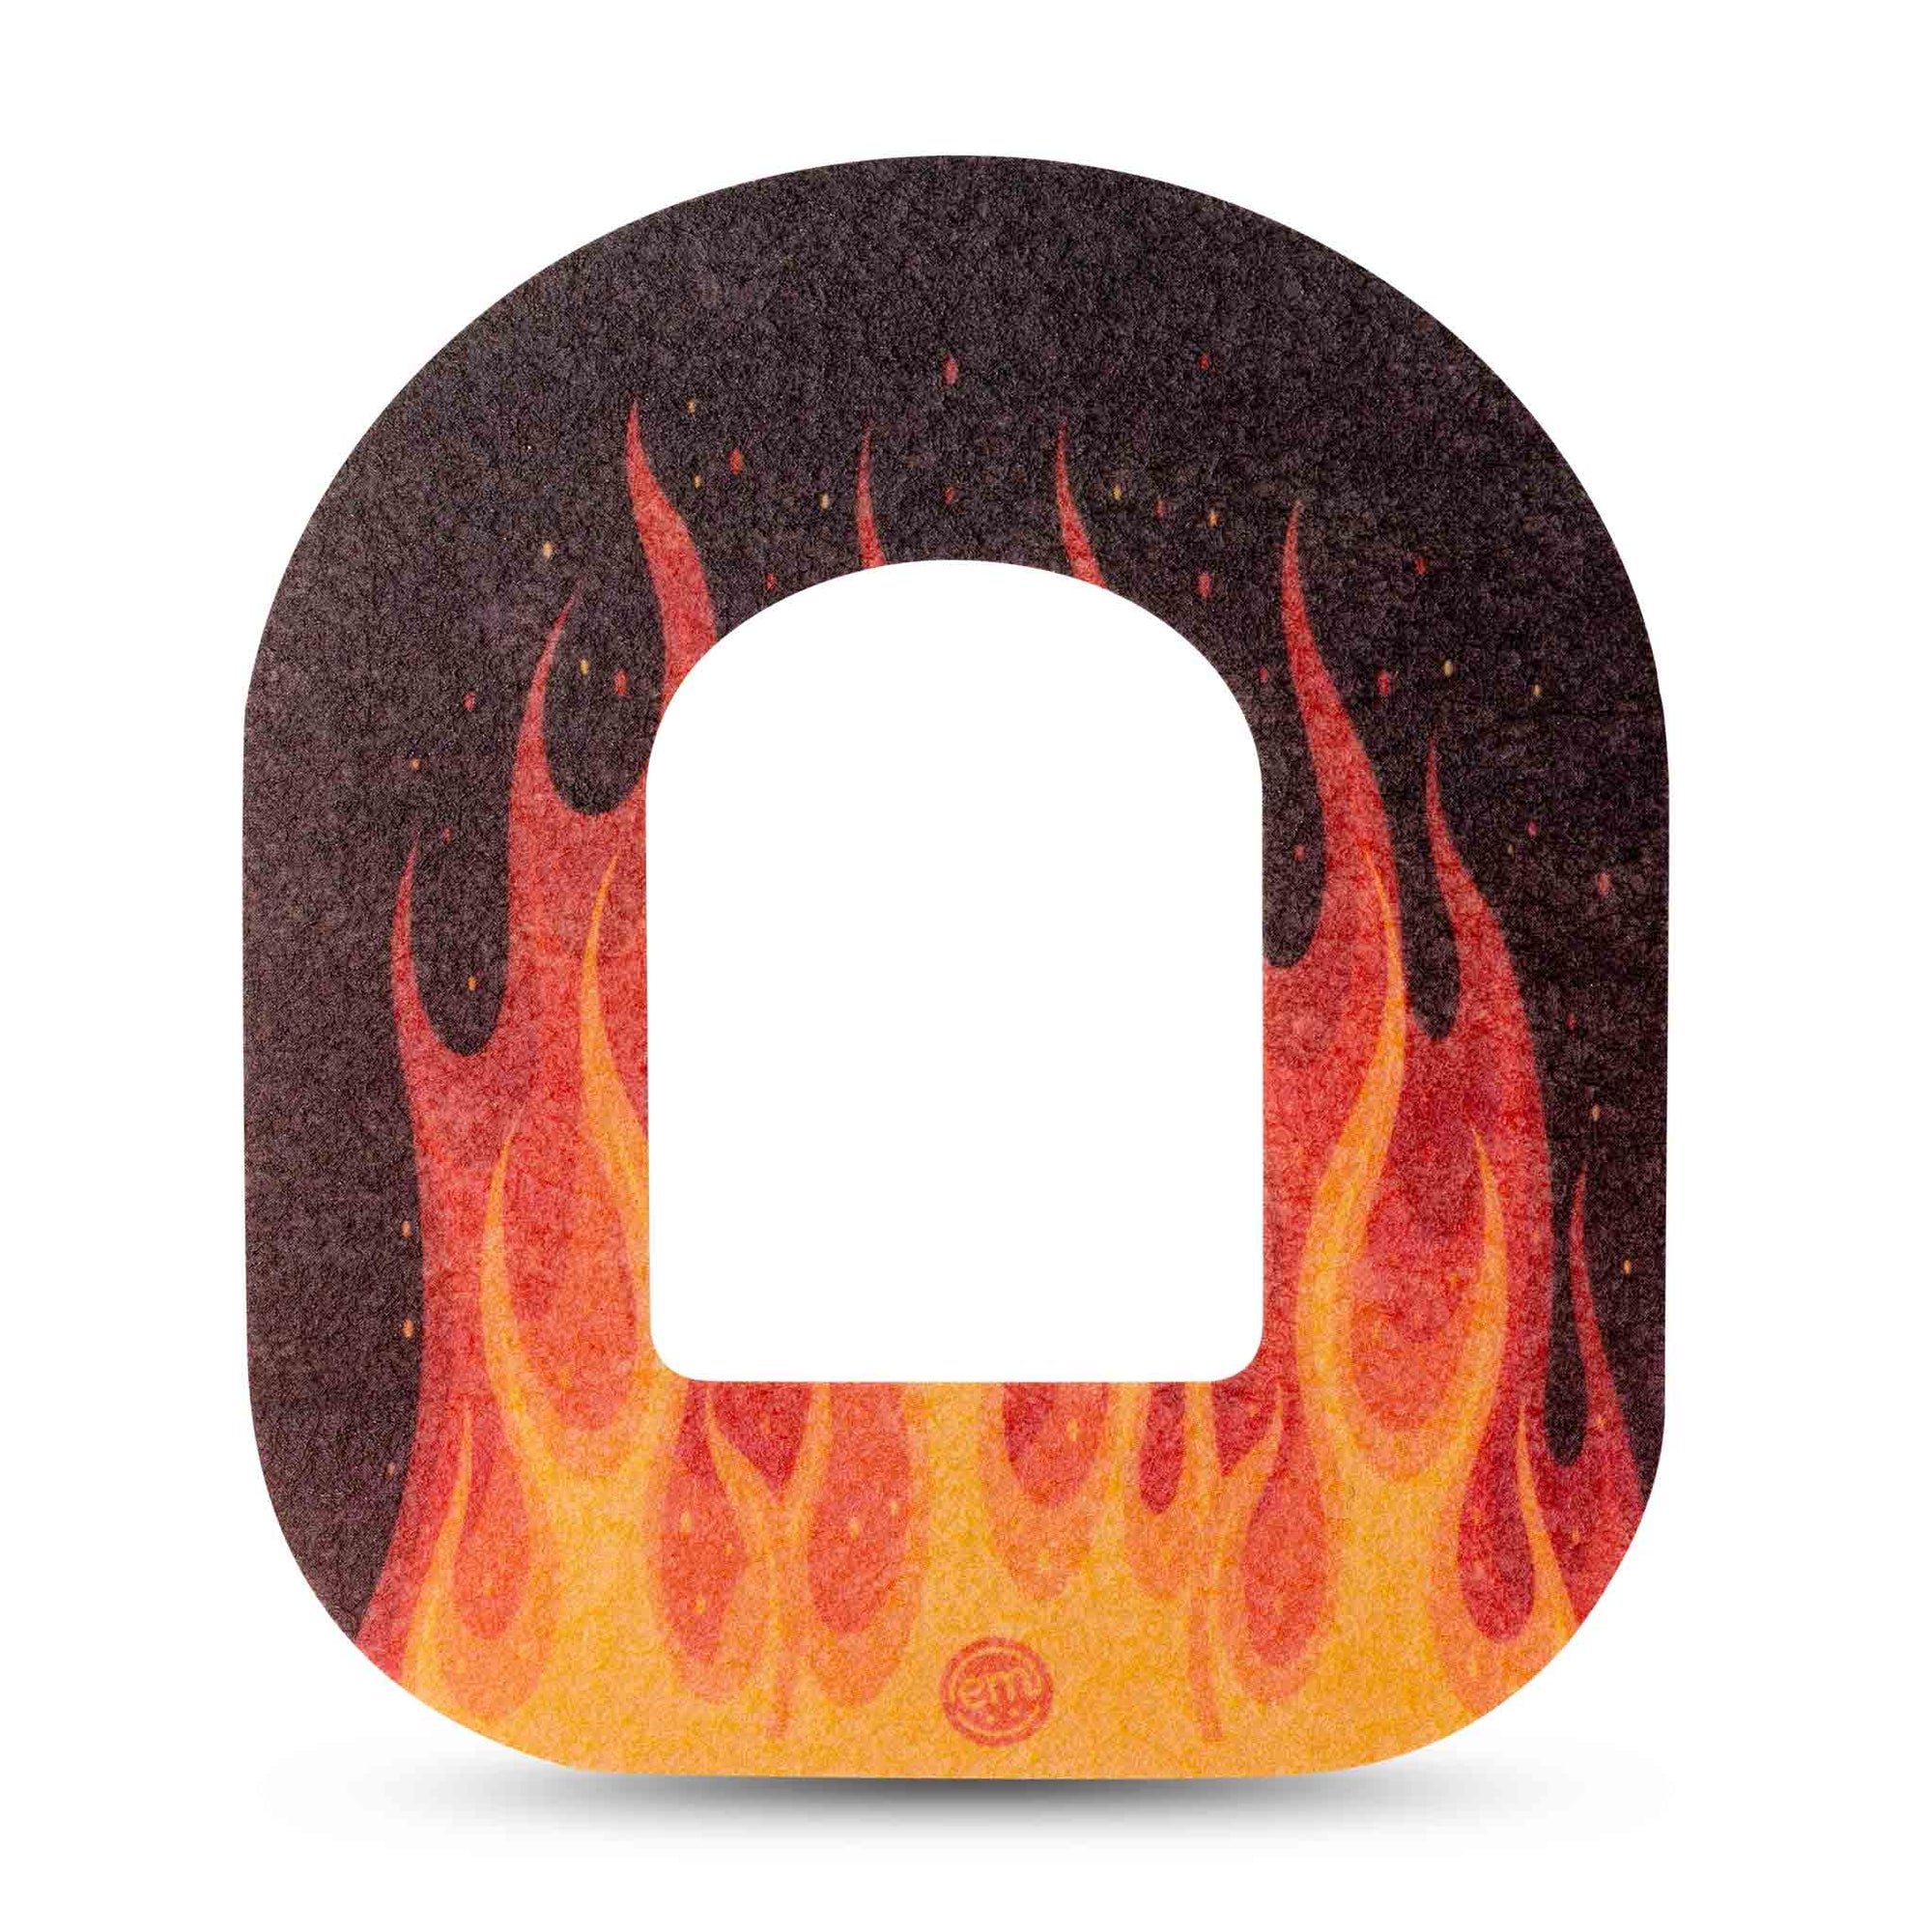 ExpressionMed Flame Pod Tape